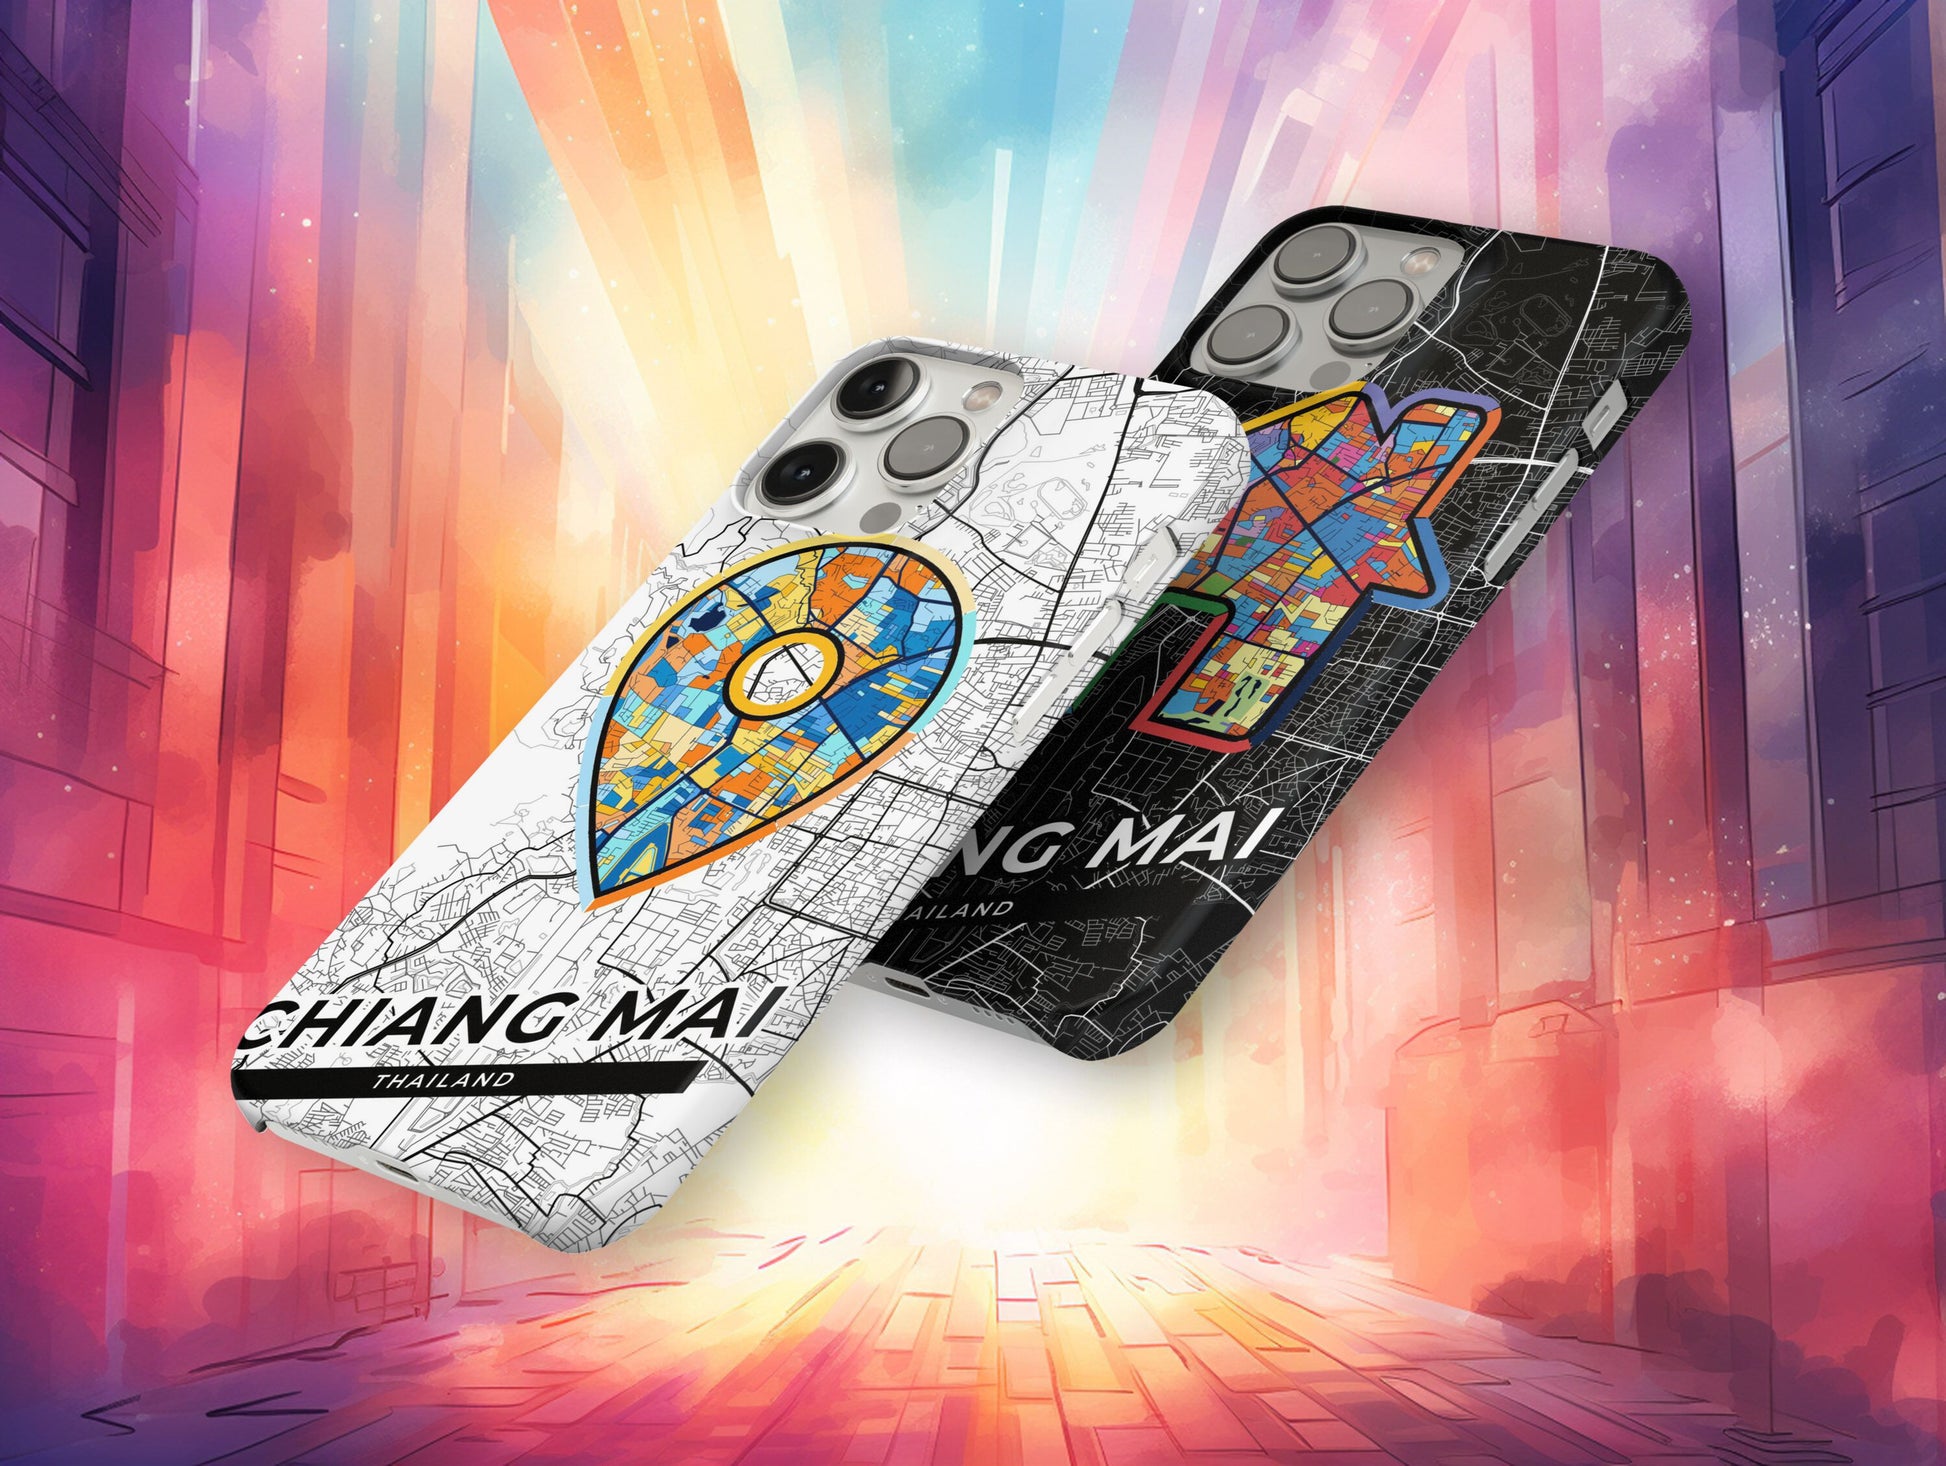 Chiang Mai Thailand slim phone case with colorful icon. Birthday, wedding or housewarming gift. Couple match cases.